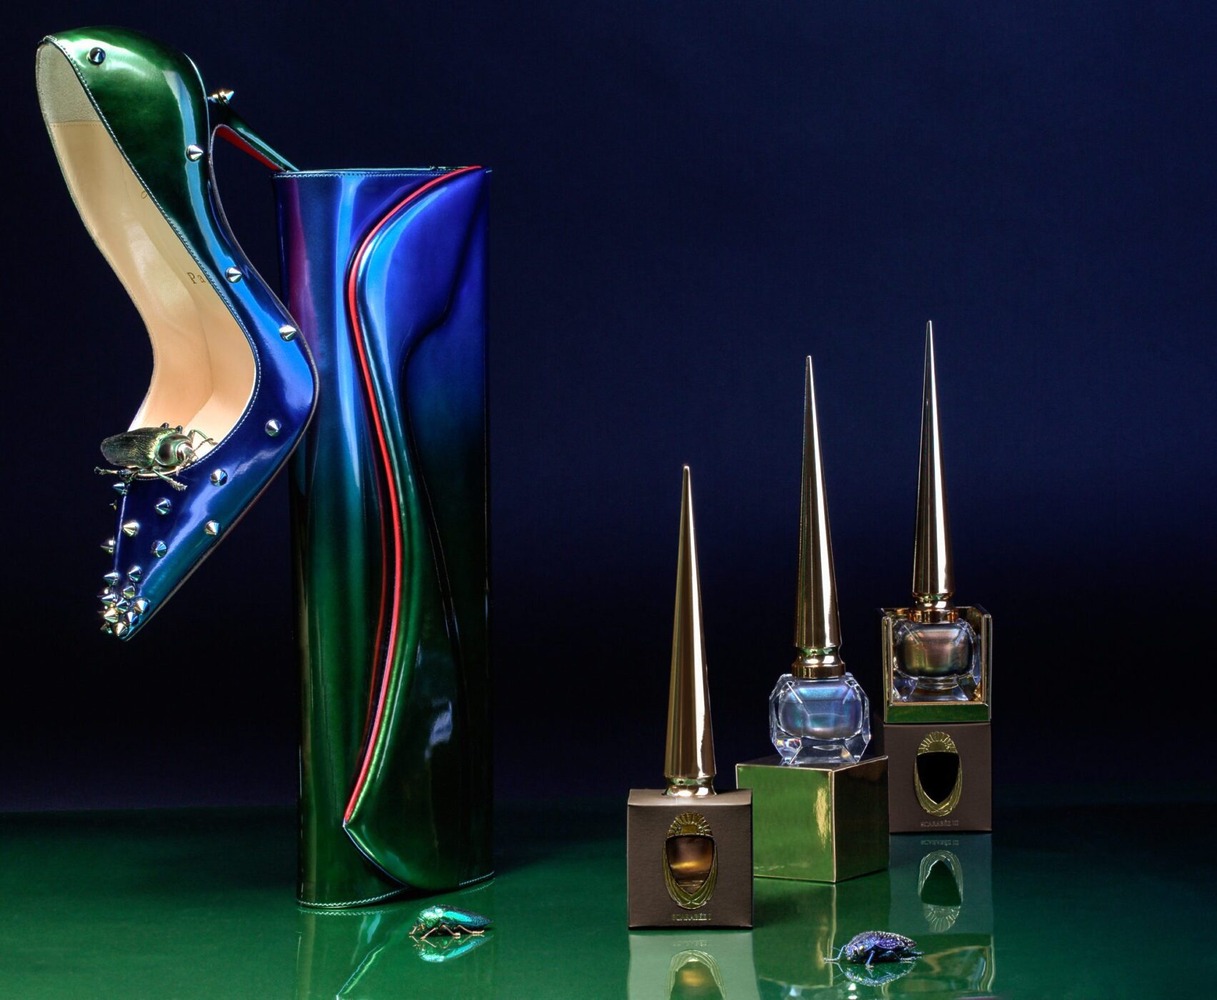 CHRISTIAN LOUBOUTIN BEAUTY SCARABEE LIMTIED-EDITION COLLECTION